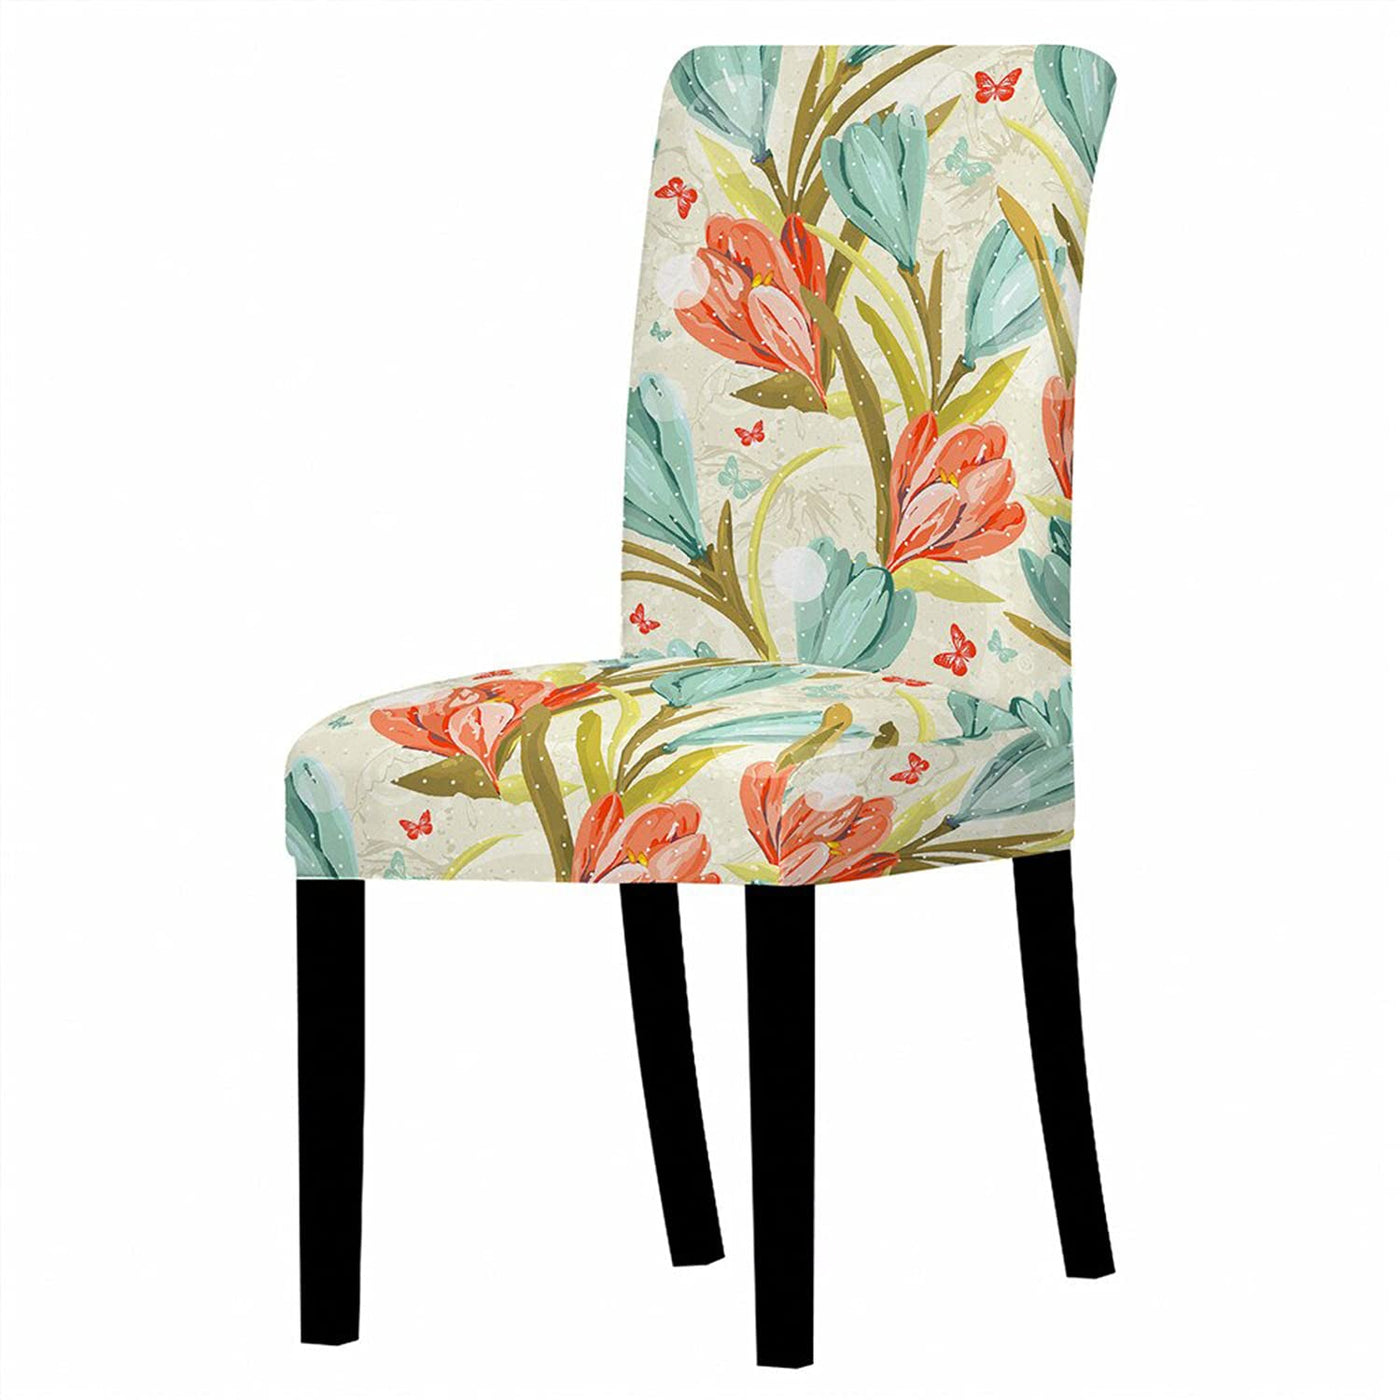 Printed Floral Chair Cover-Multi Flower